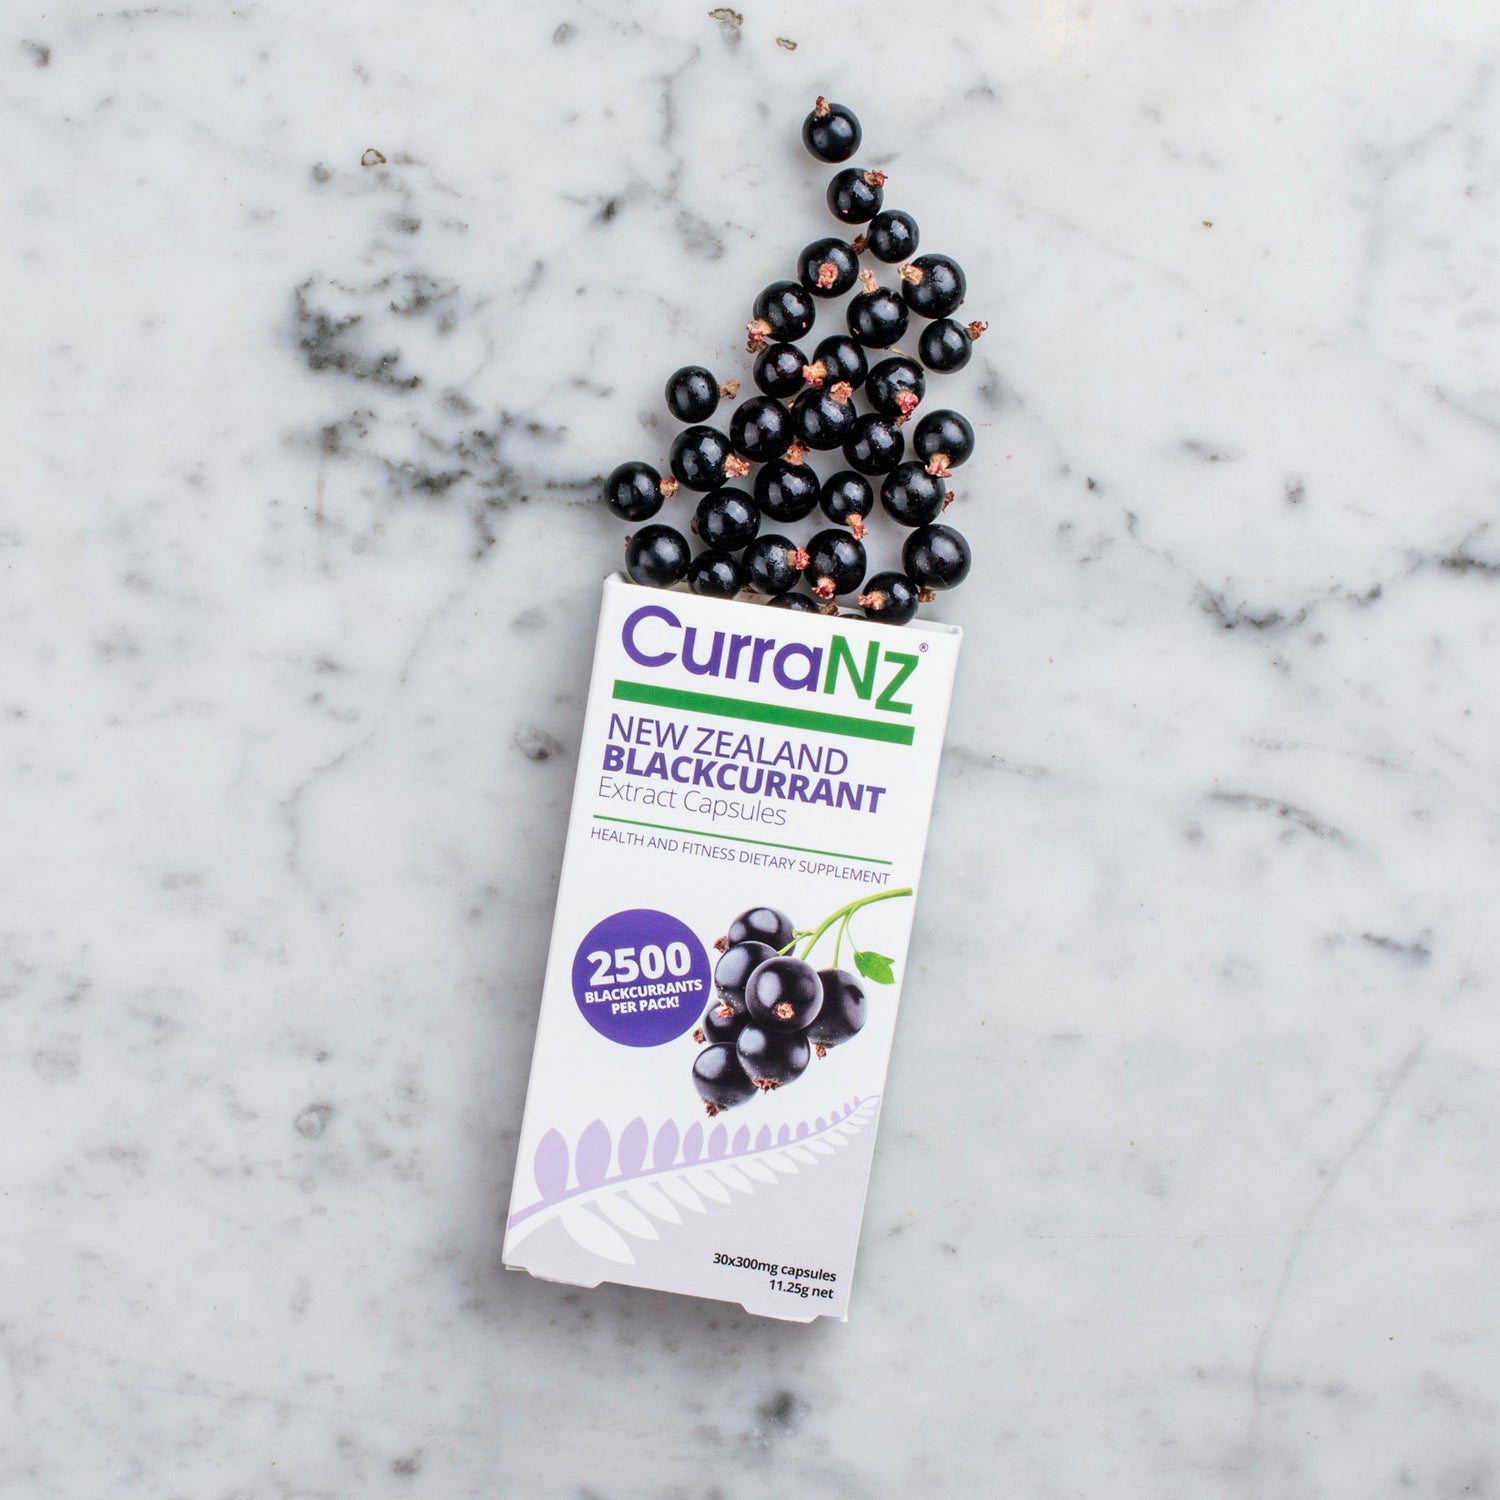 CurraNZ® supplement packaging with New Zealand blackcurrants